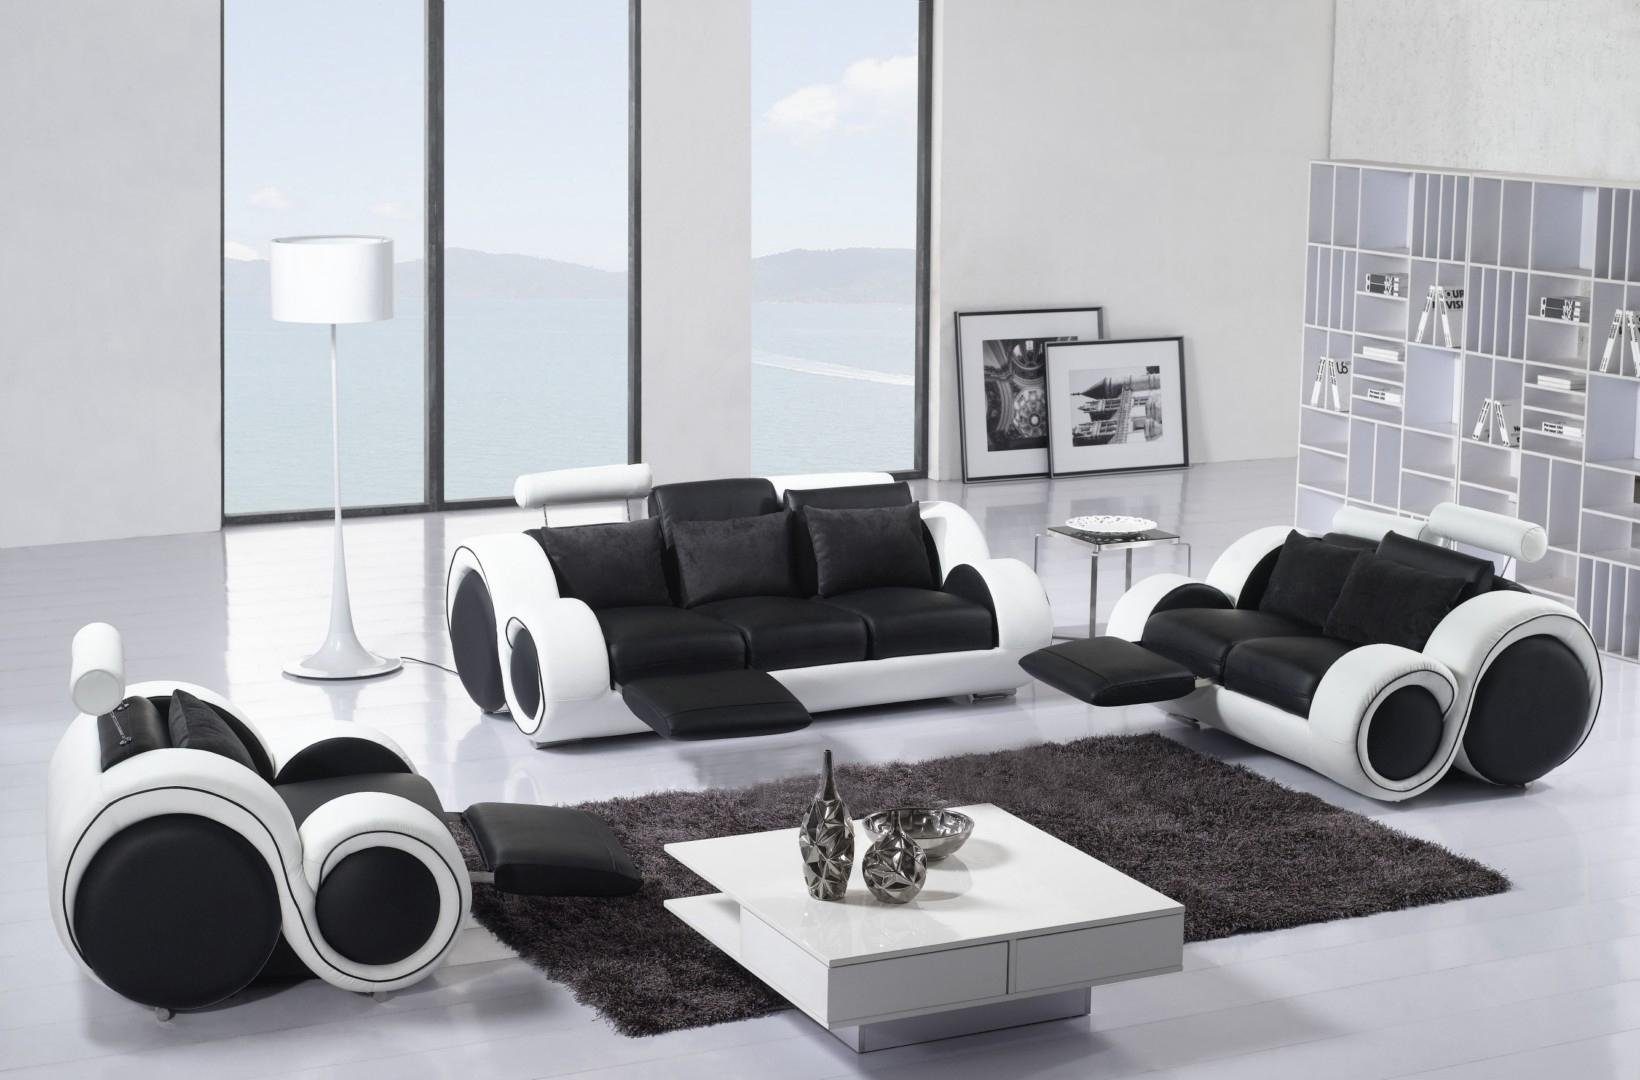 JVmoebel Sofa Moderne Sofagarnitur 3+2+1 Sofa Funktion Couch, in Europe Relax Made Sitzer